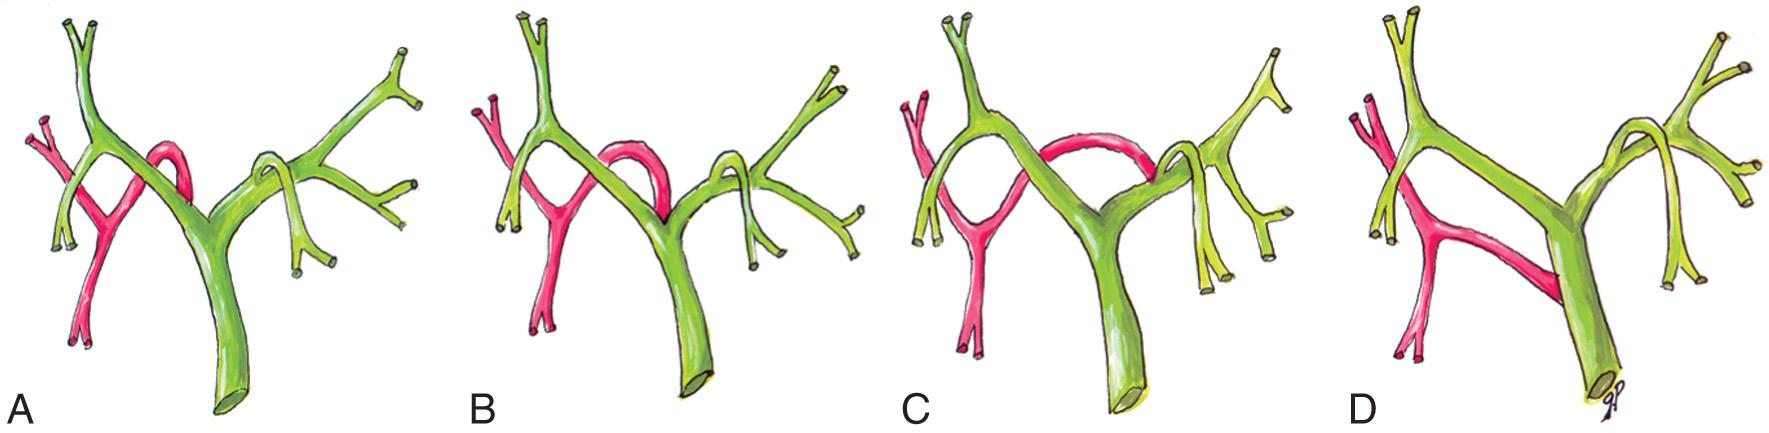 FIG. 6.2, Common Variants of Bile Duct Branching.